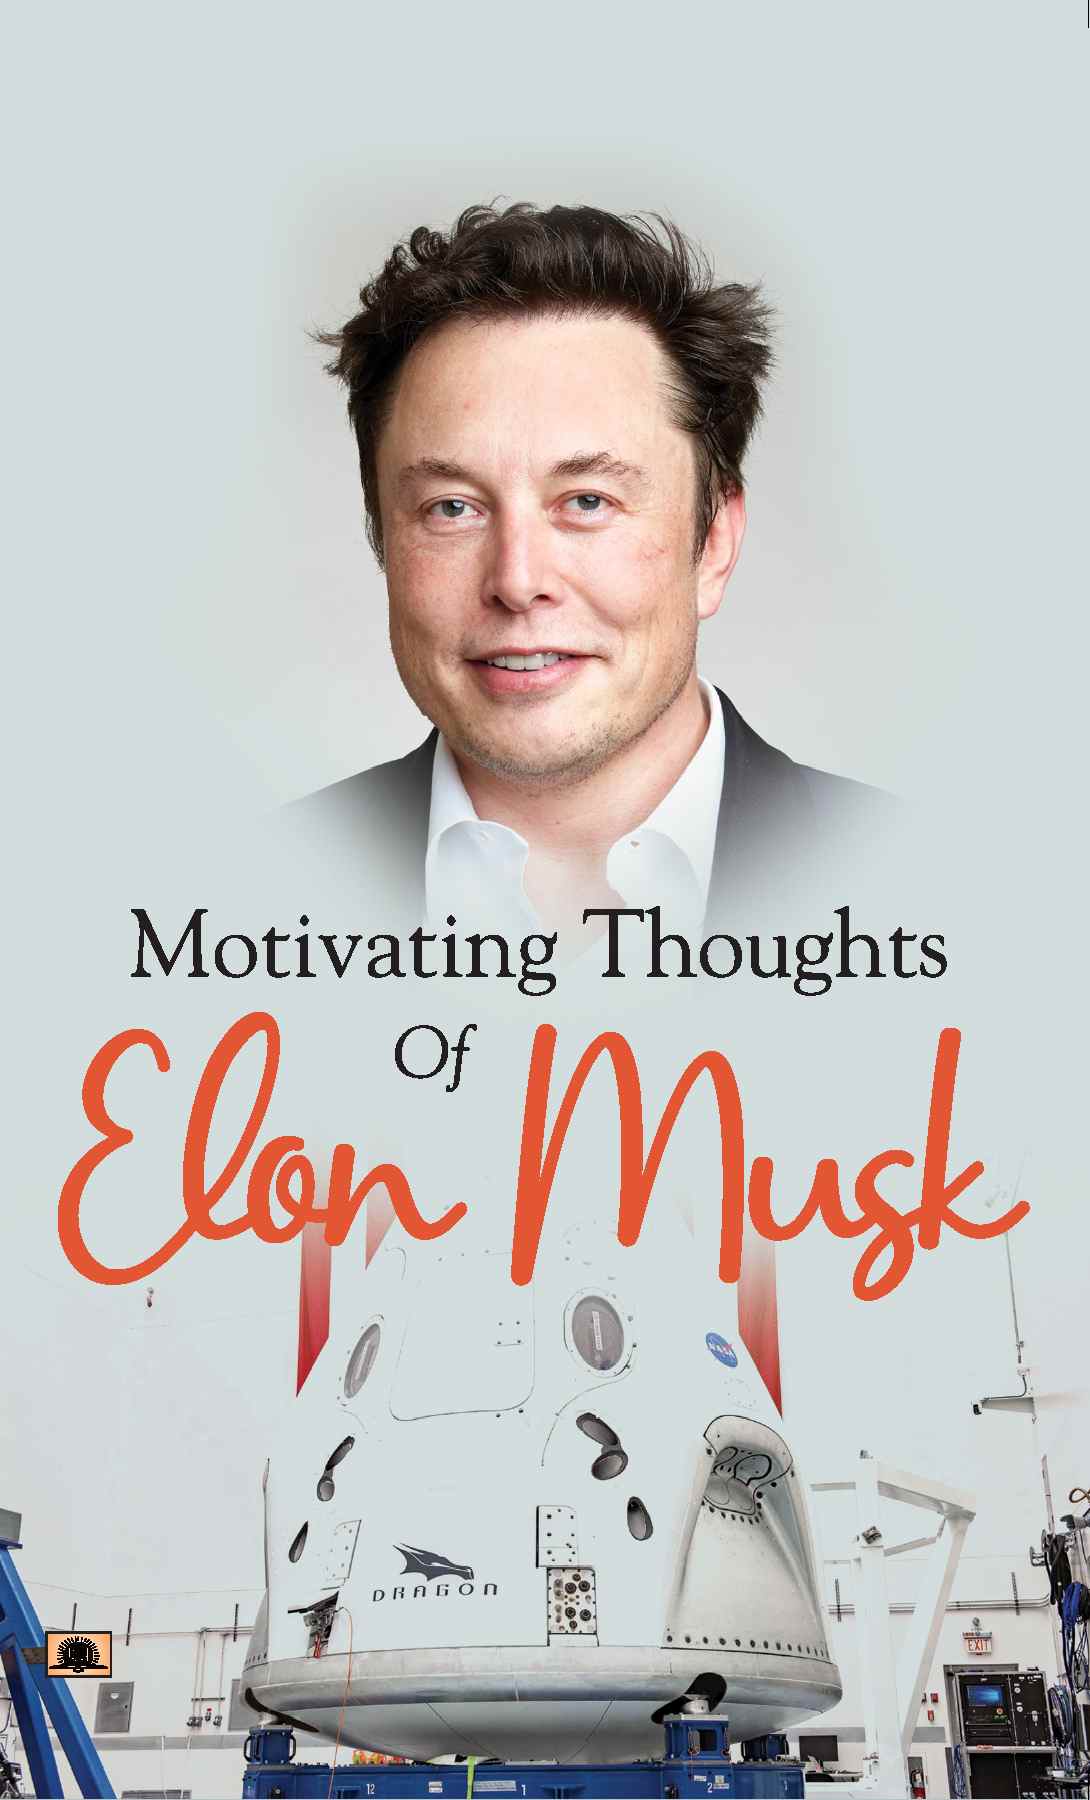 Motivating Thoughts of Elon Musk  